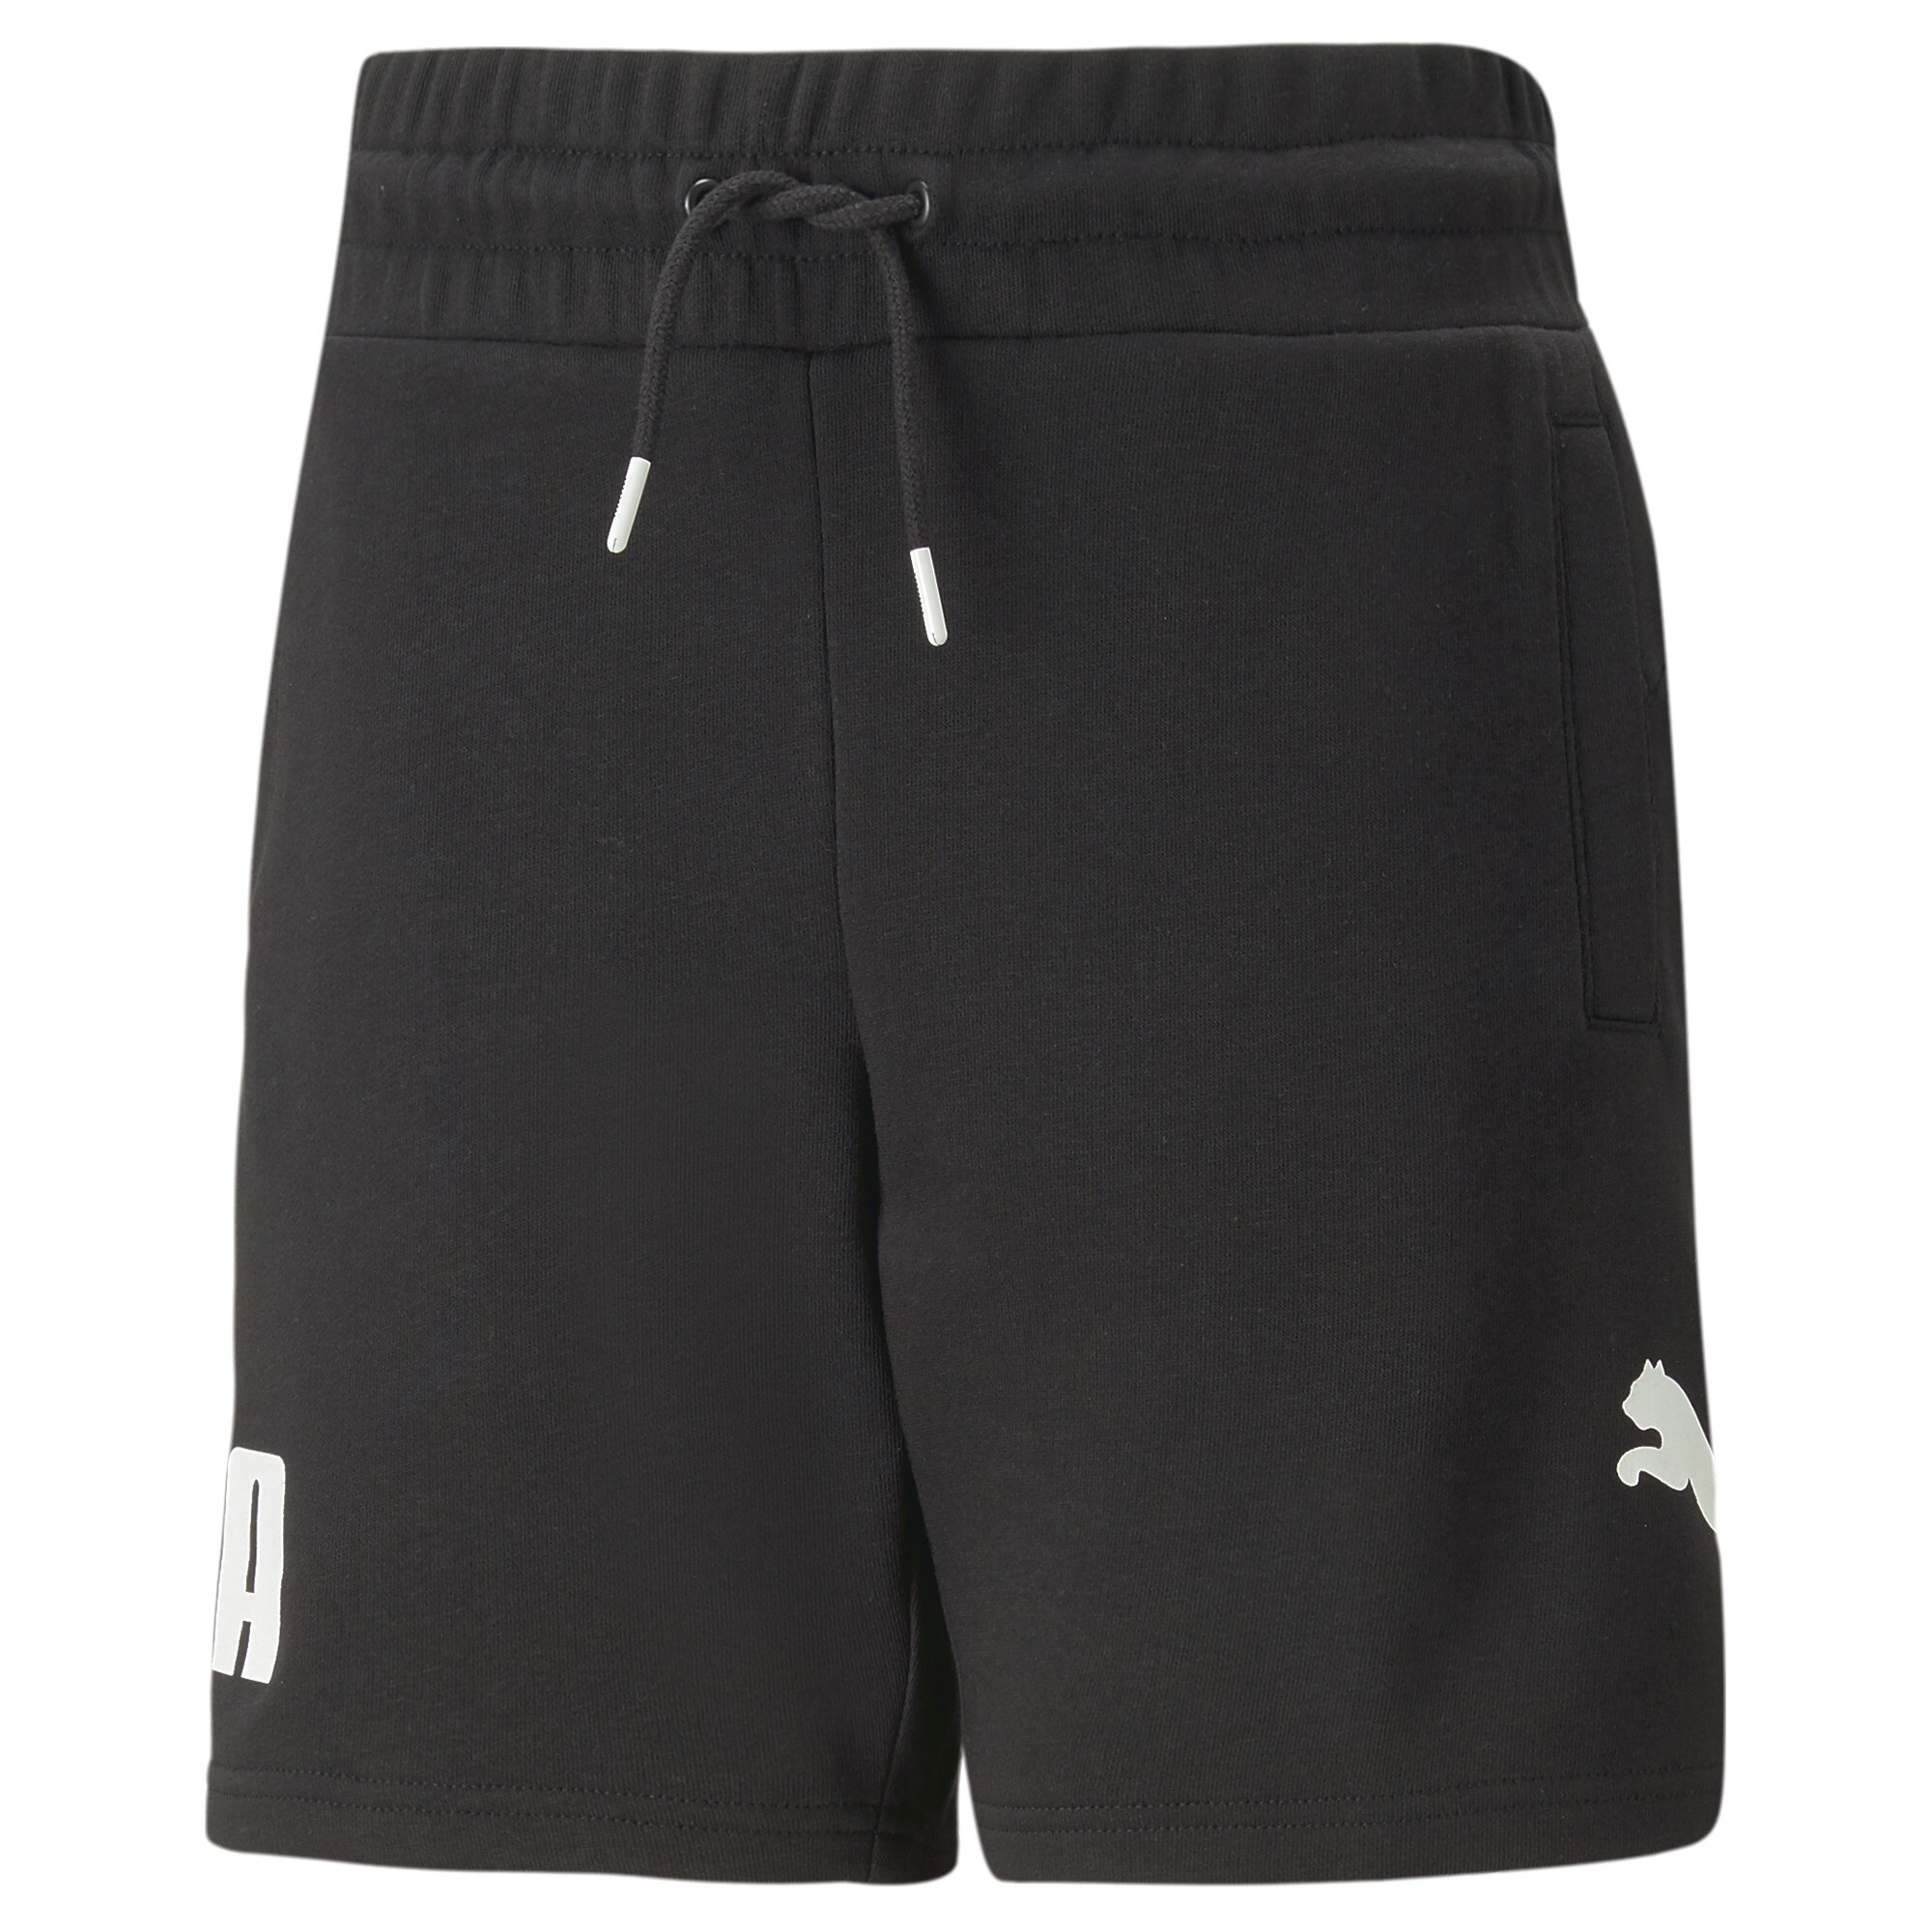 PUMA Power Shorts In Black, Size 5-6 Youth